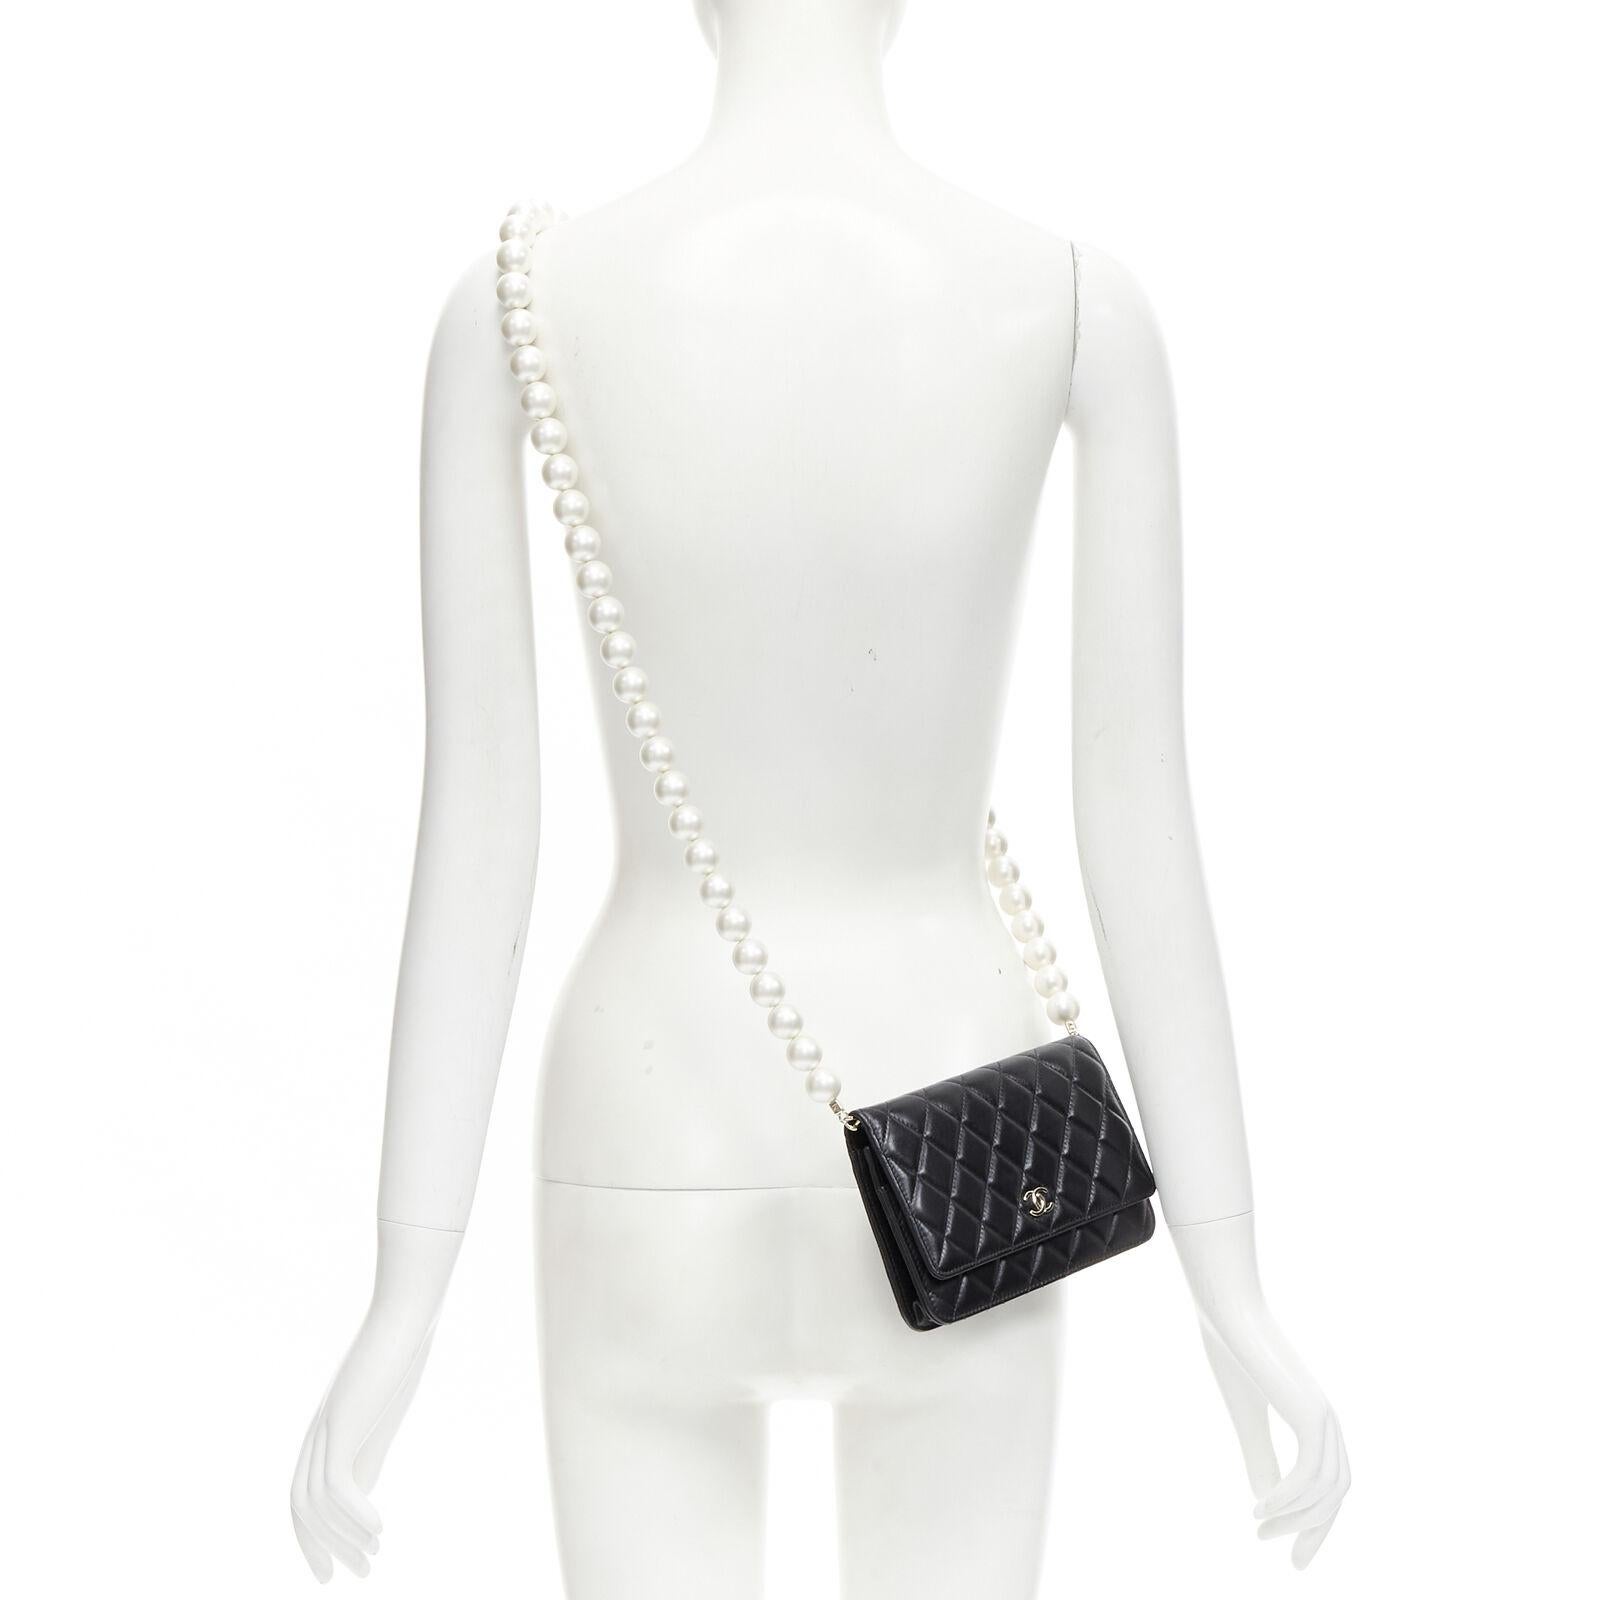 CHANEL 2021 XL pearl black quilted leather flap wallet on chain crossbody bag
Reference: AAWC/A00397
Brand: Chanel
Designer: Virginie Viard
Collection: 2021 - Runway
Material: Leather, Plastic
Color: Black, Pearl
Pattern: Solid
Closure: